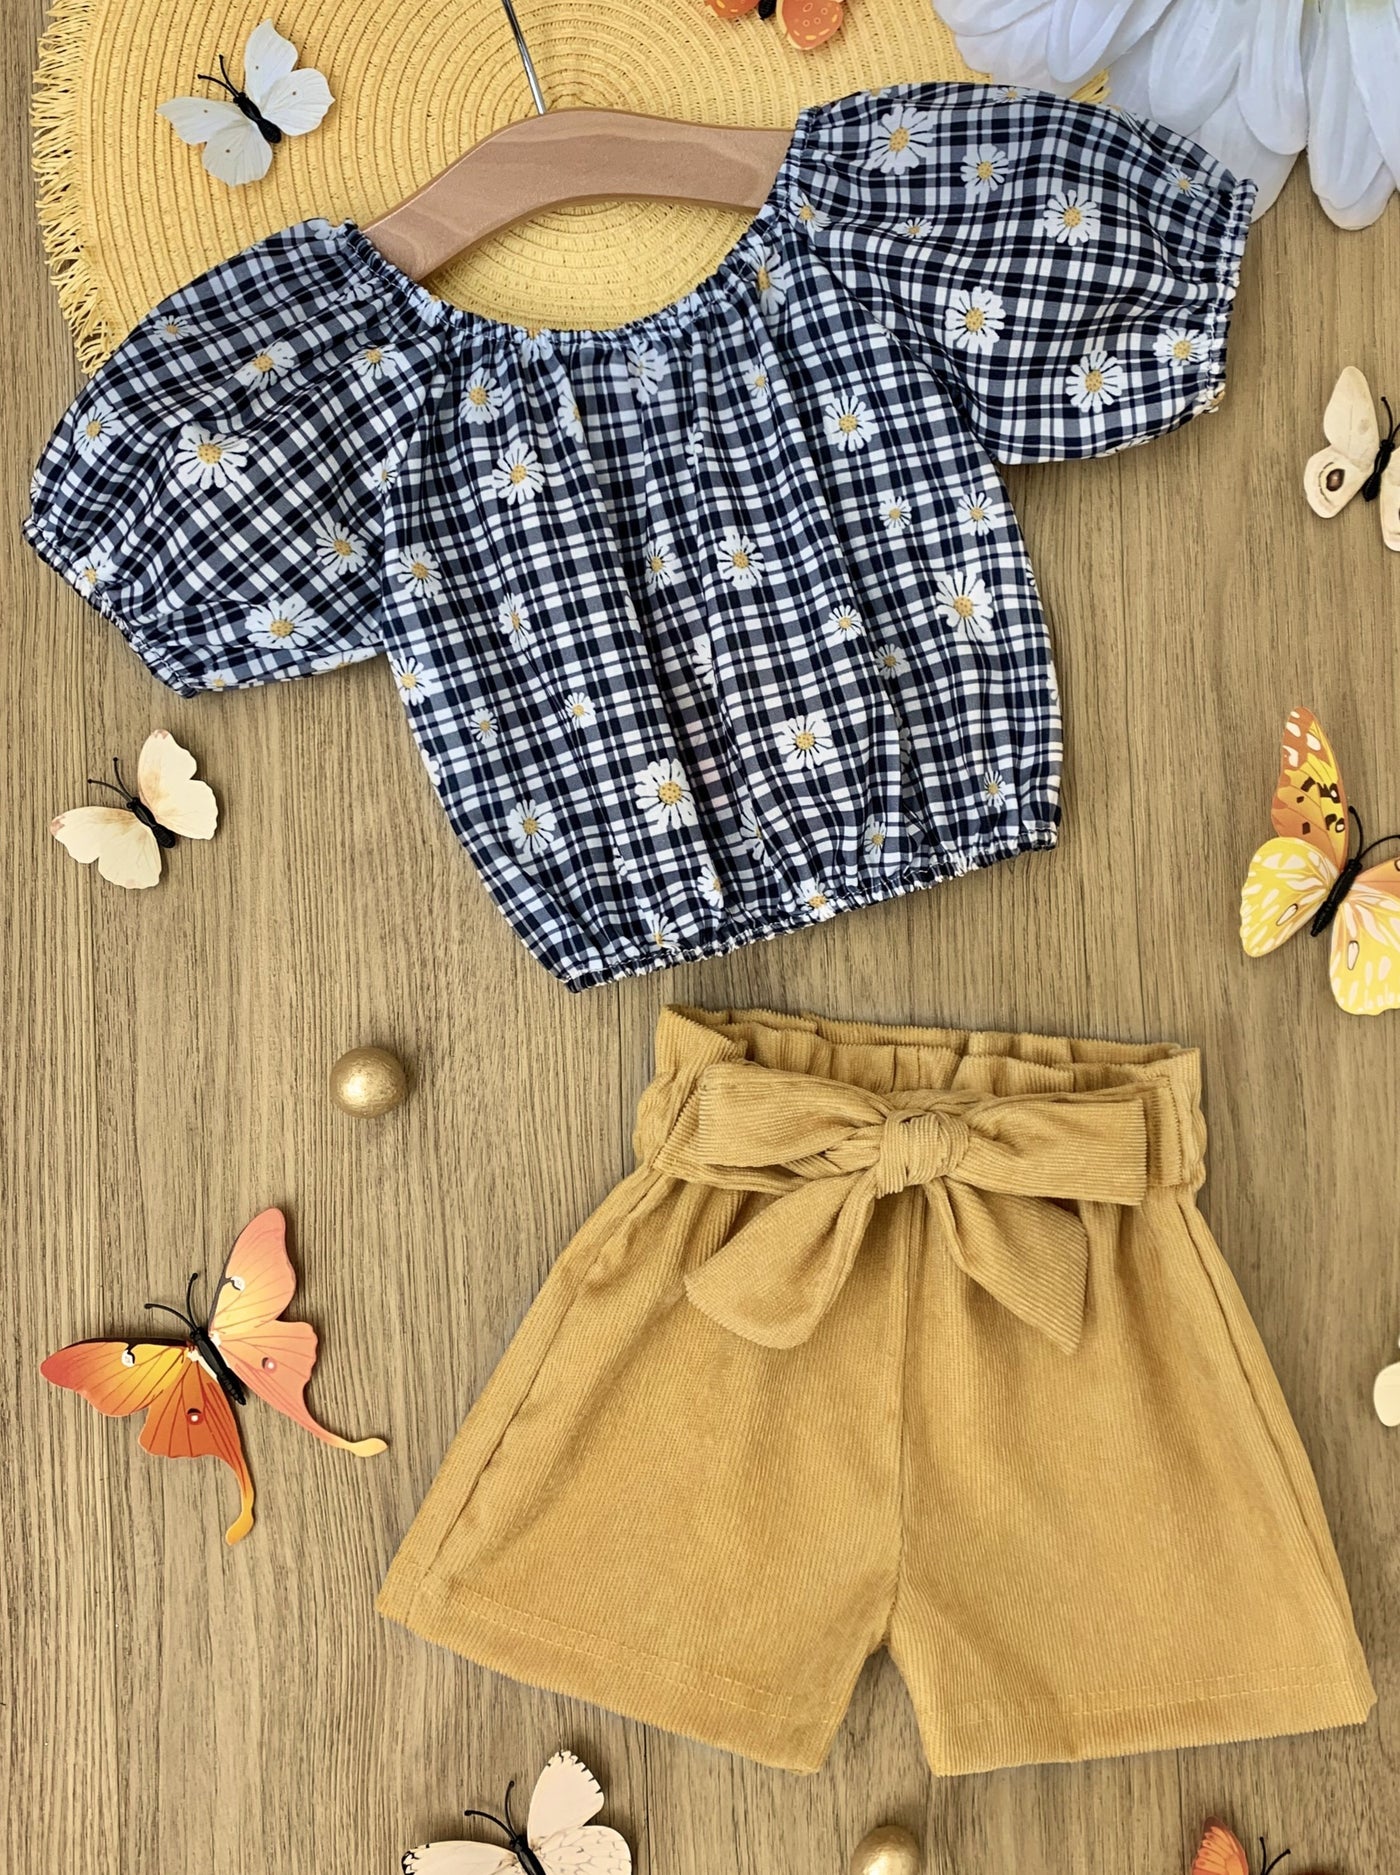 Spring Outfits | Girls Plaid Daisy Smocked Top & Paperbag Shorts Set